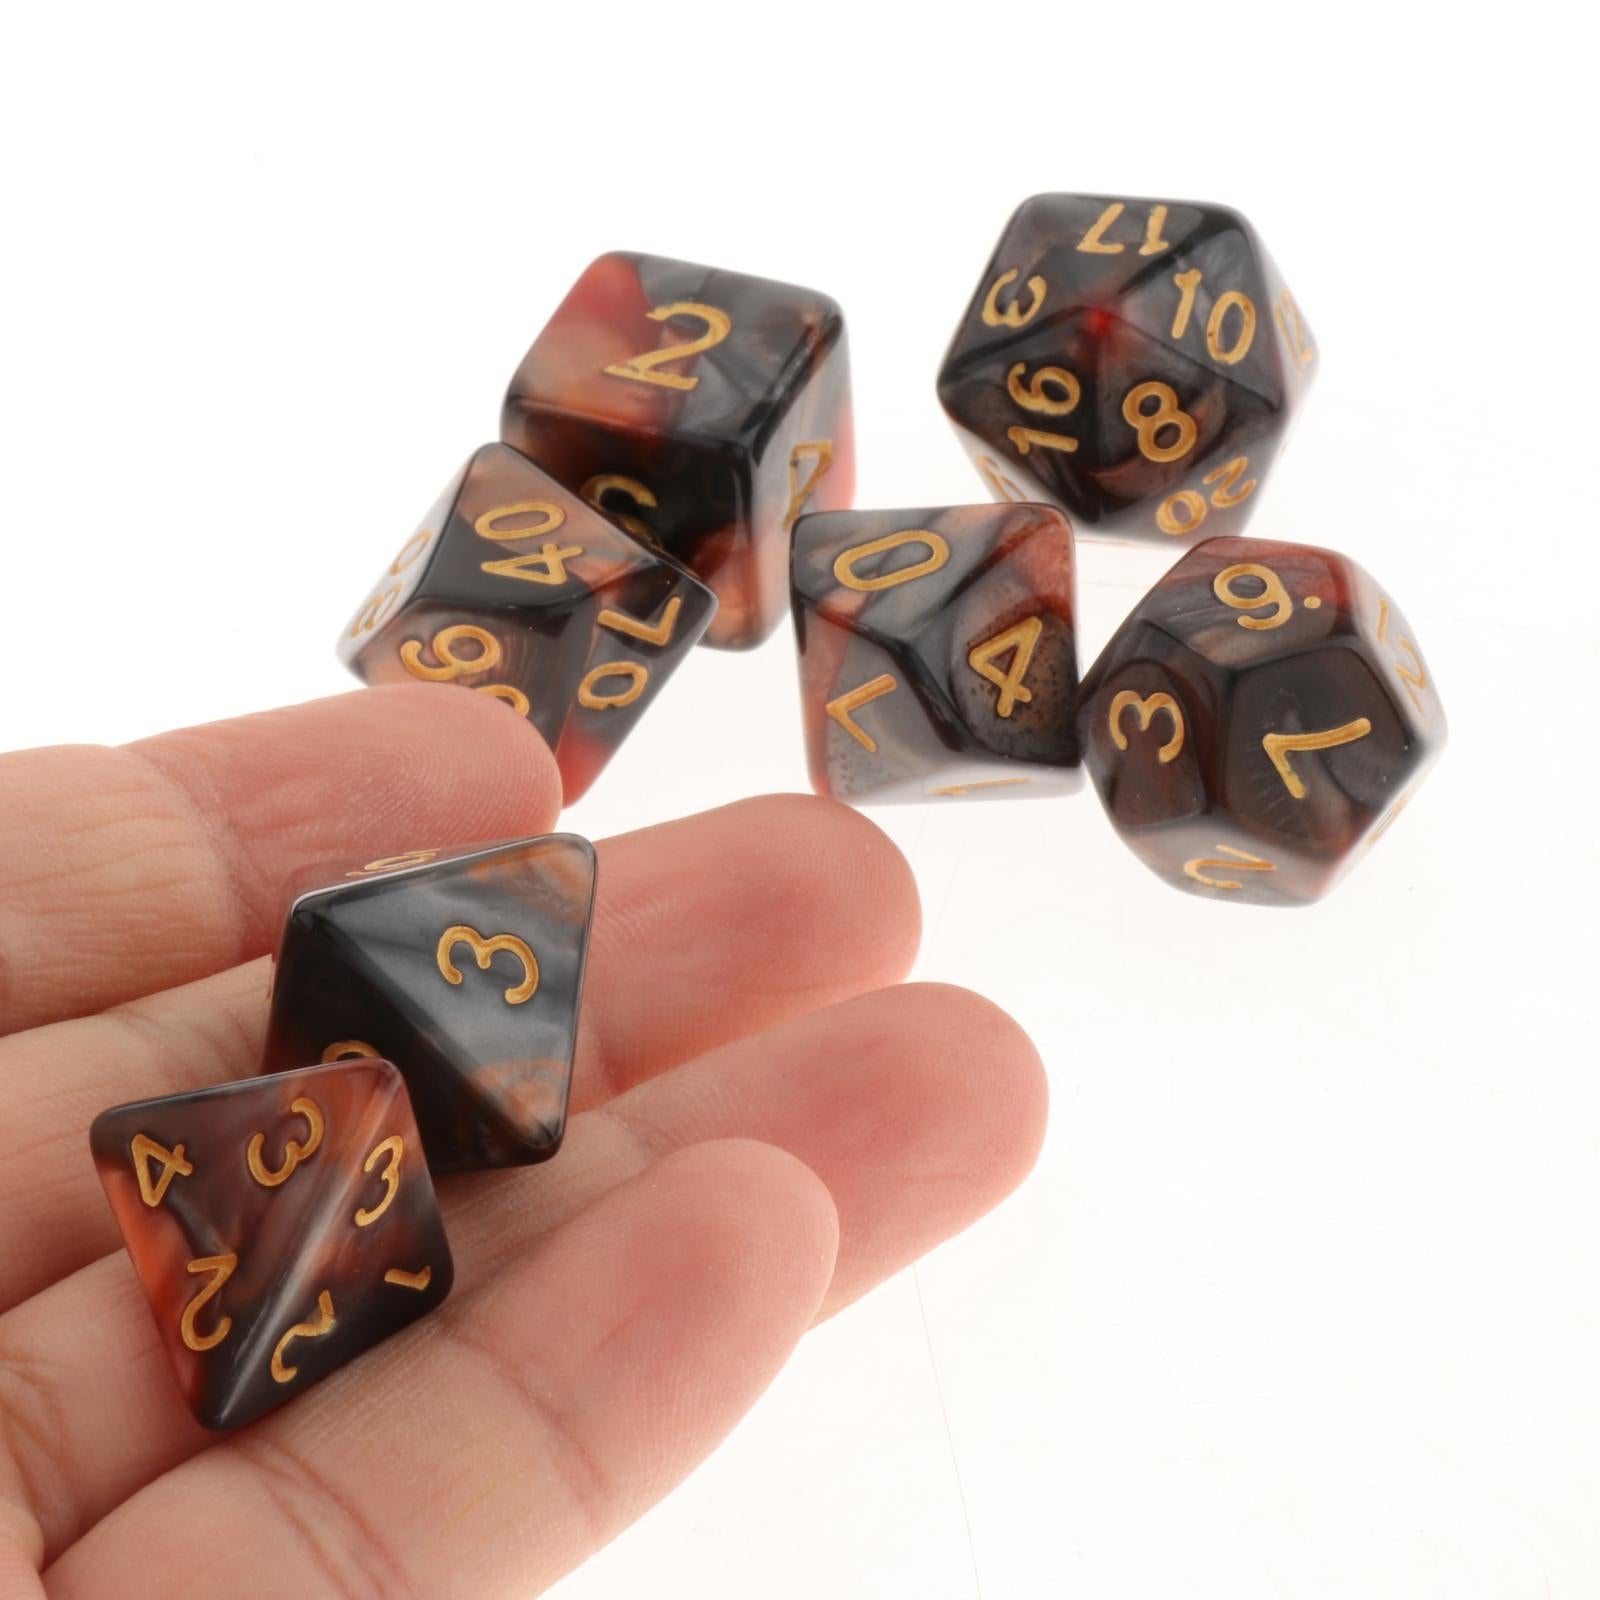 7Pcs Polyhedral Dice Double-Colors Polyhedral Game Dice for RPG Dungeons and Dragons DND RPG MTG D20 D12 D10 D8 D6 D4 Table Game